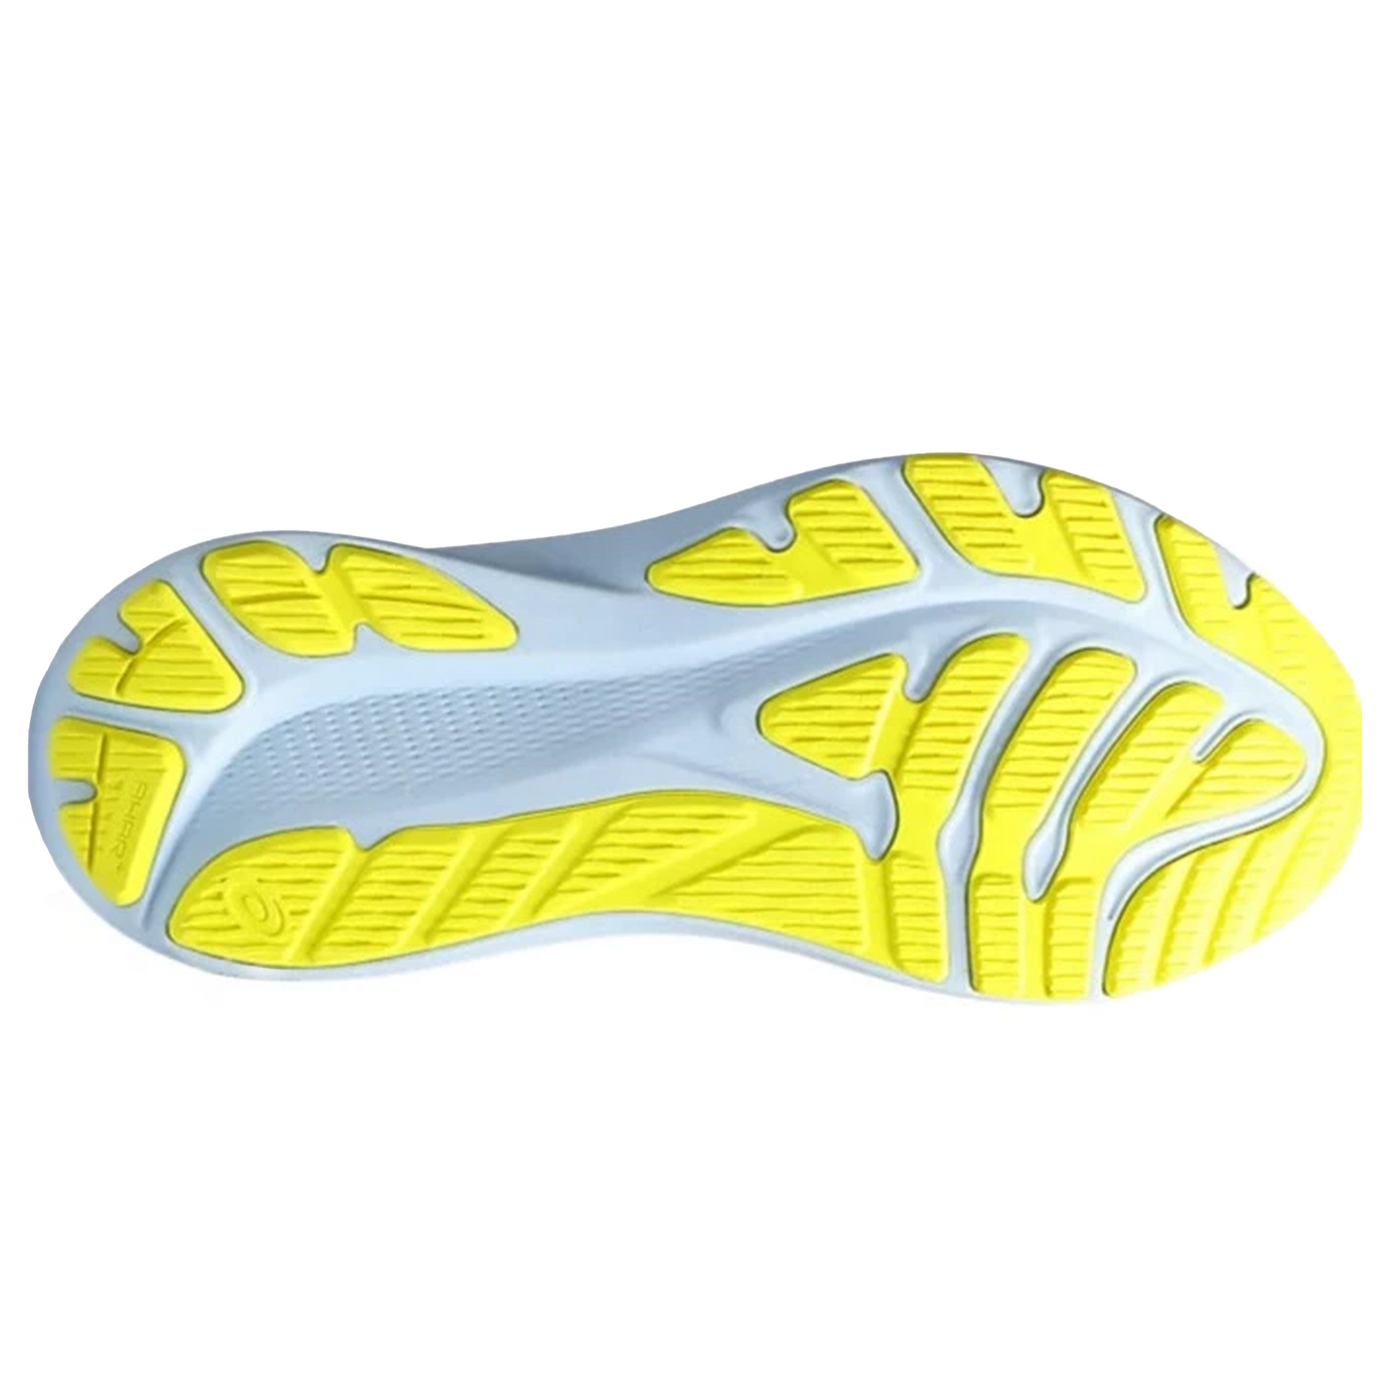 Asics Mens GT-2000 12 - French Blue/Bright Yellow - Stability